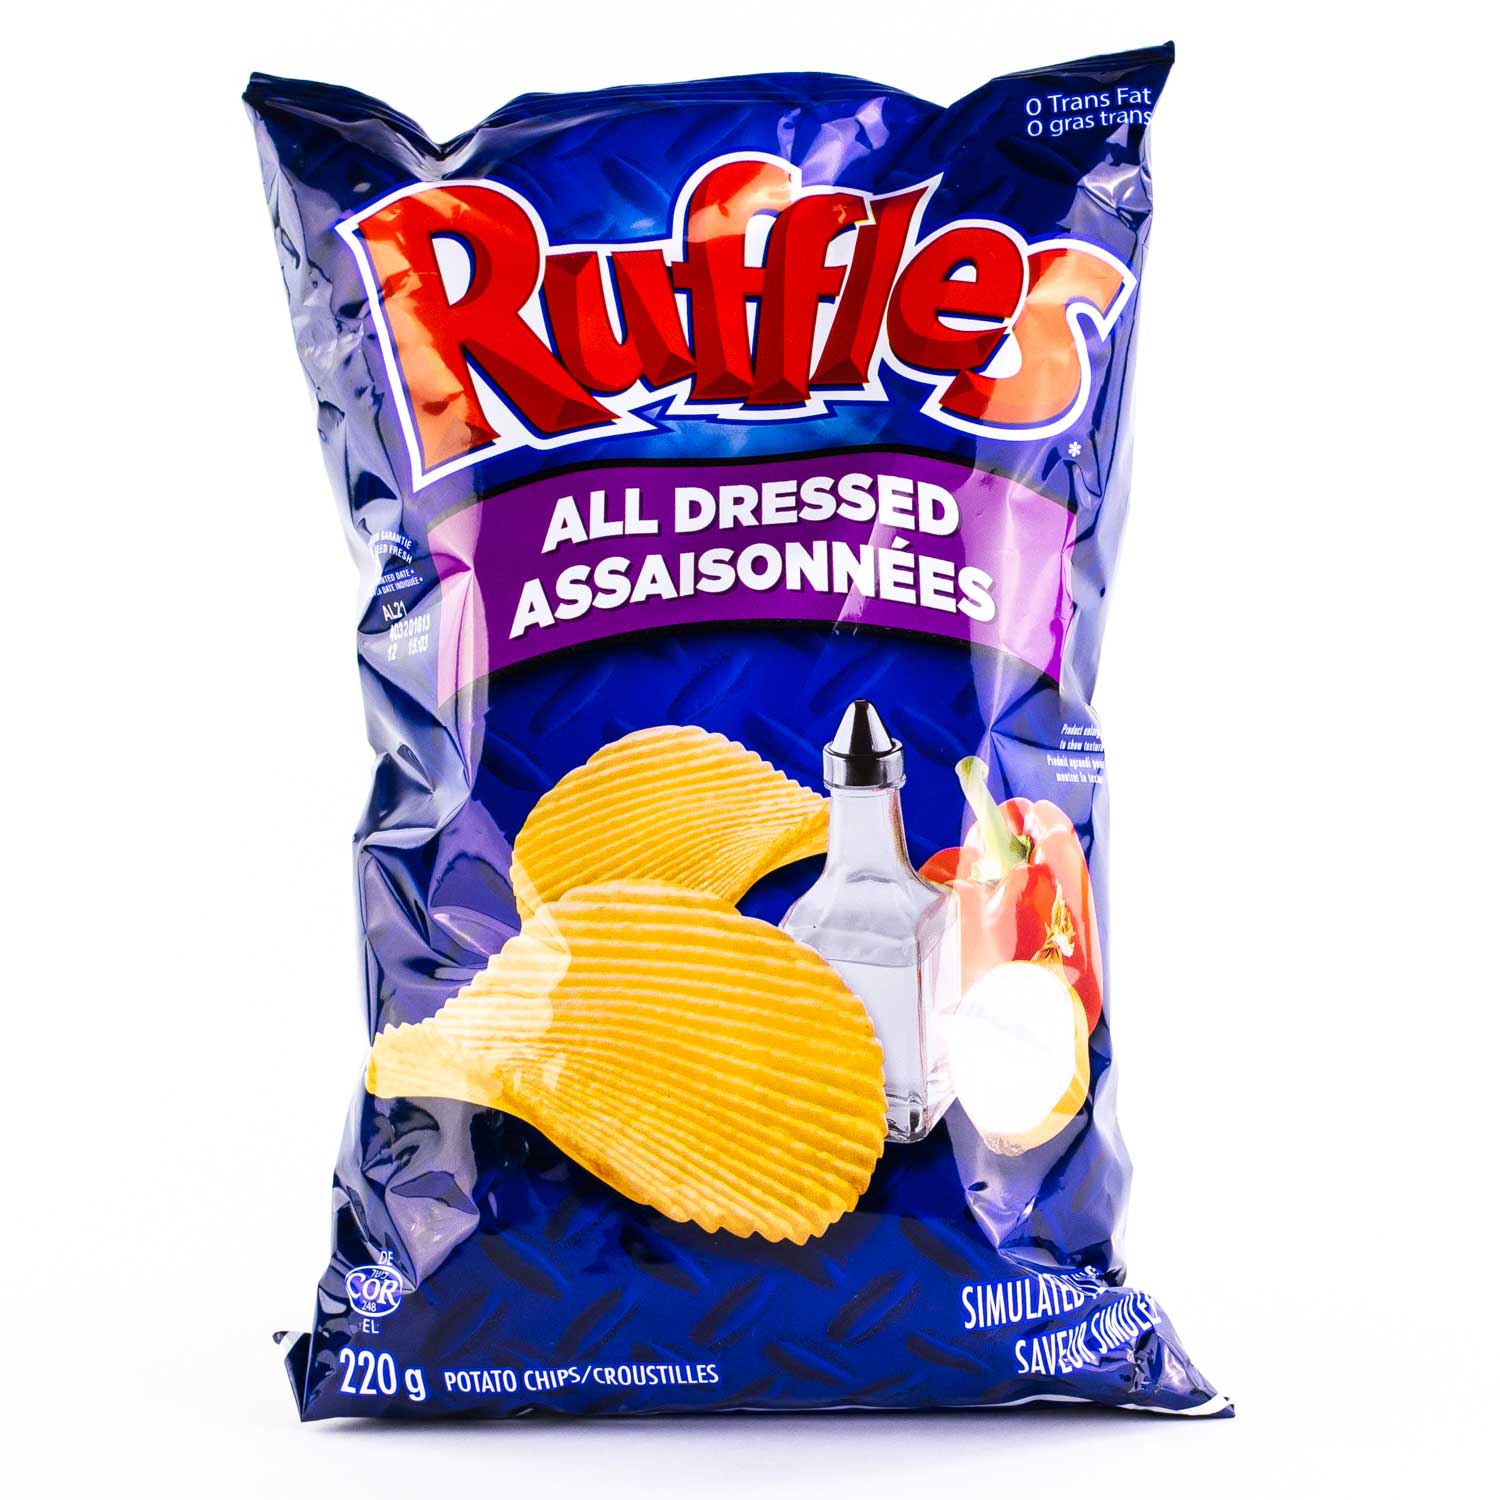 all dress chips